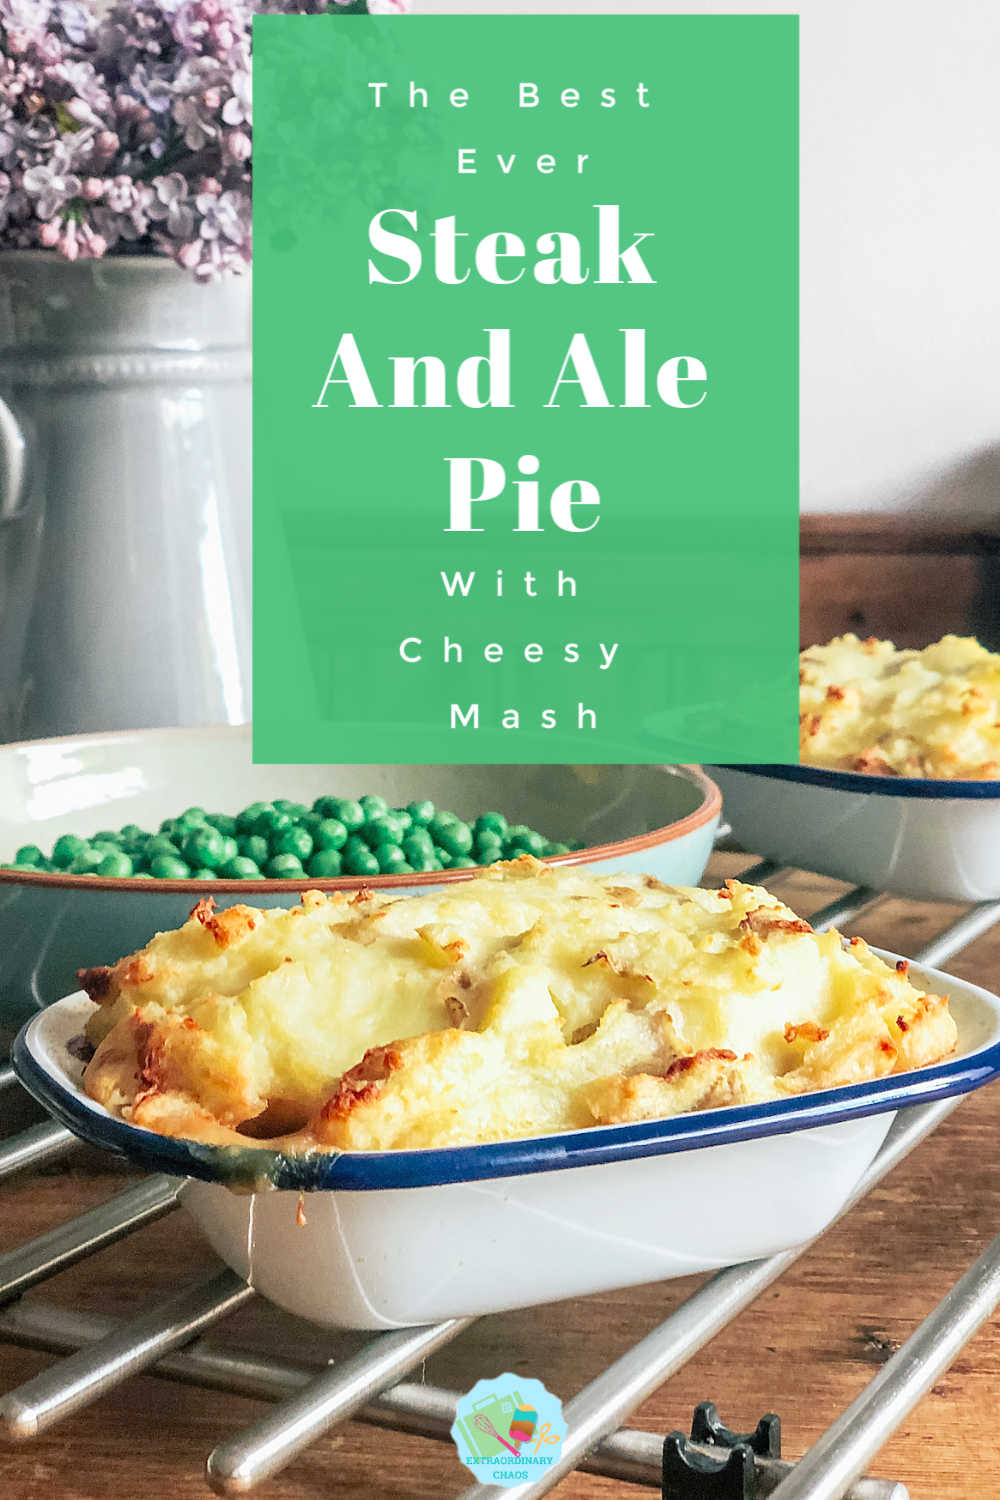 How to make slow cooker steak and ale pie with cheesy mash